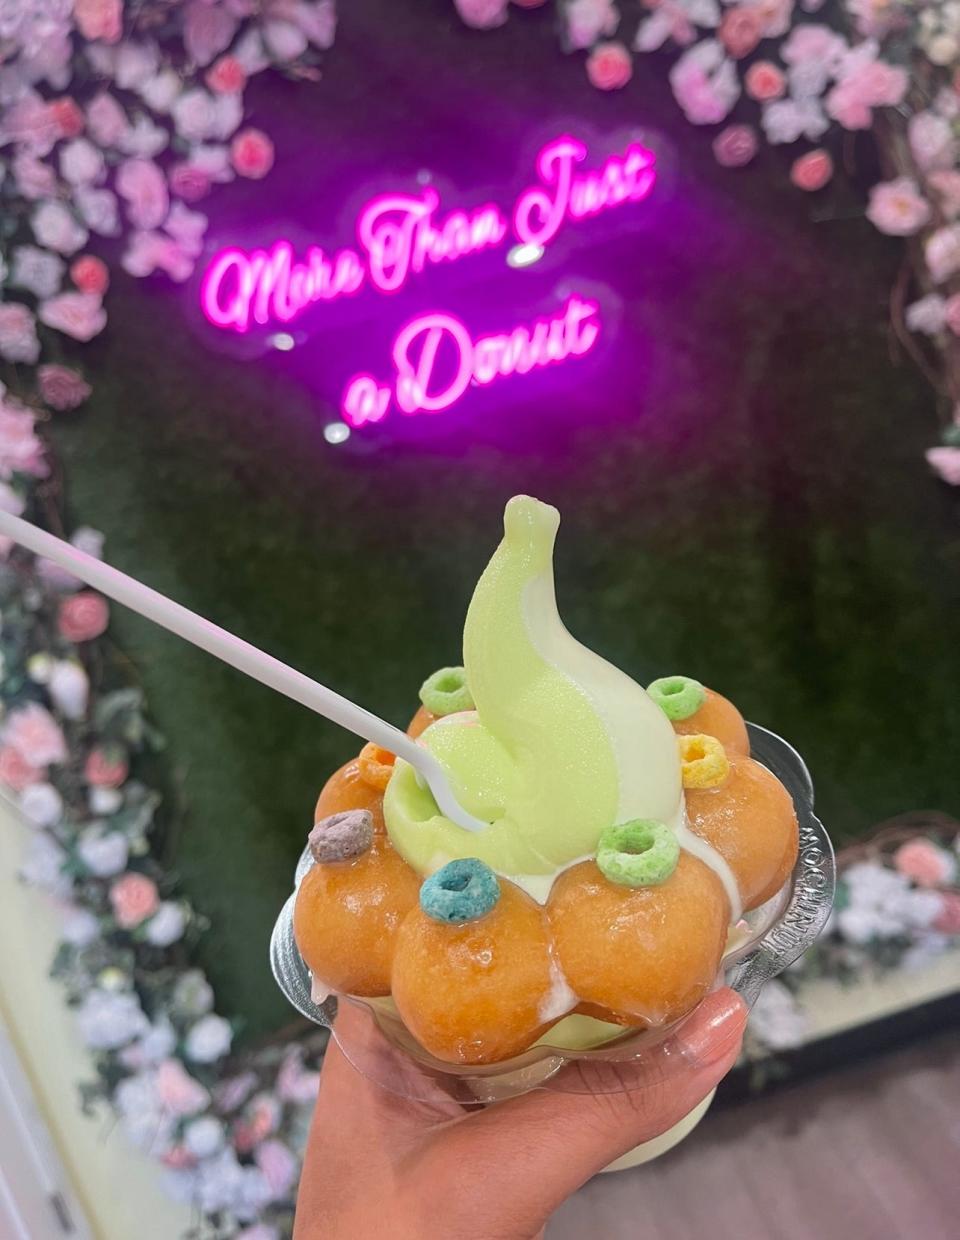 A mochinut sundae, made with melon and buttercream dairy-free ice cream and a Fruit Loops Korean donut, from Mochinut in Manalapan.